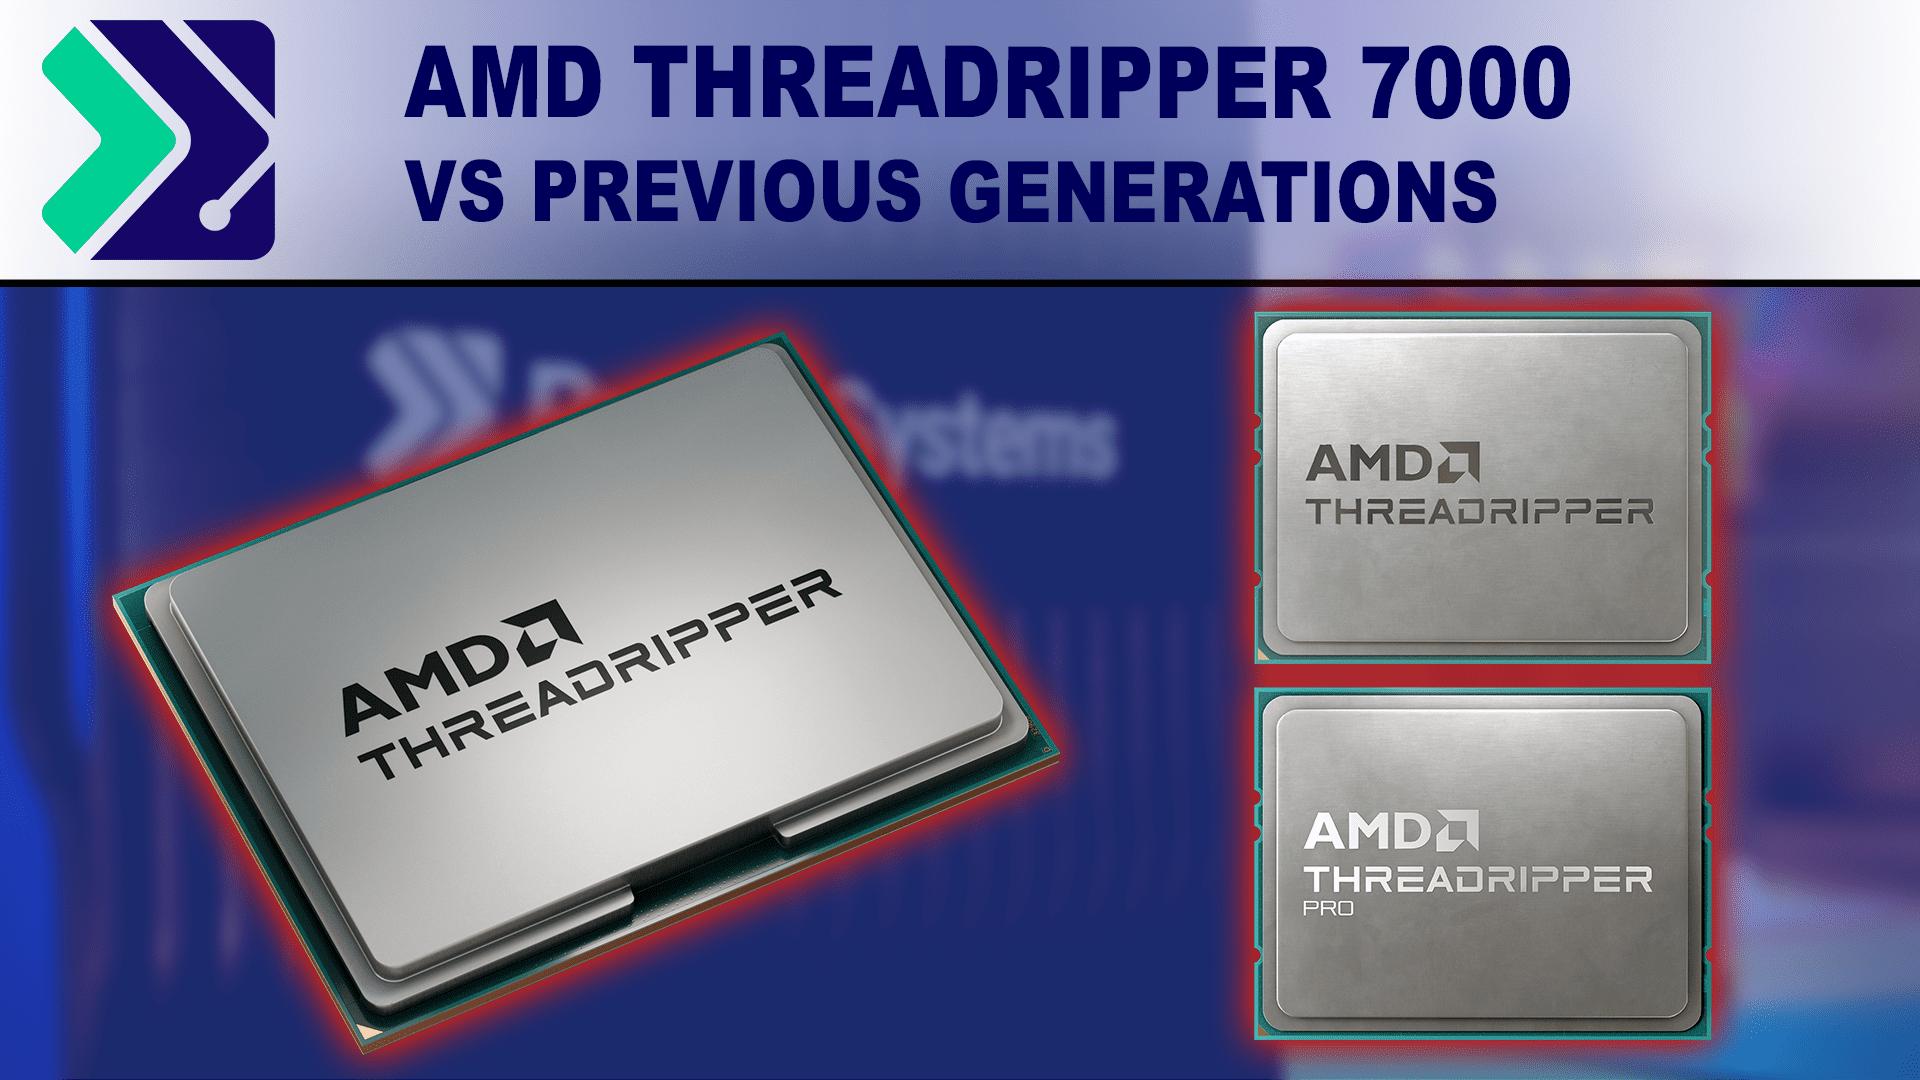 AMD Threadripper 1950X review: Better than Intel in almost every